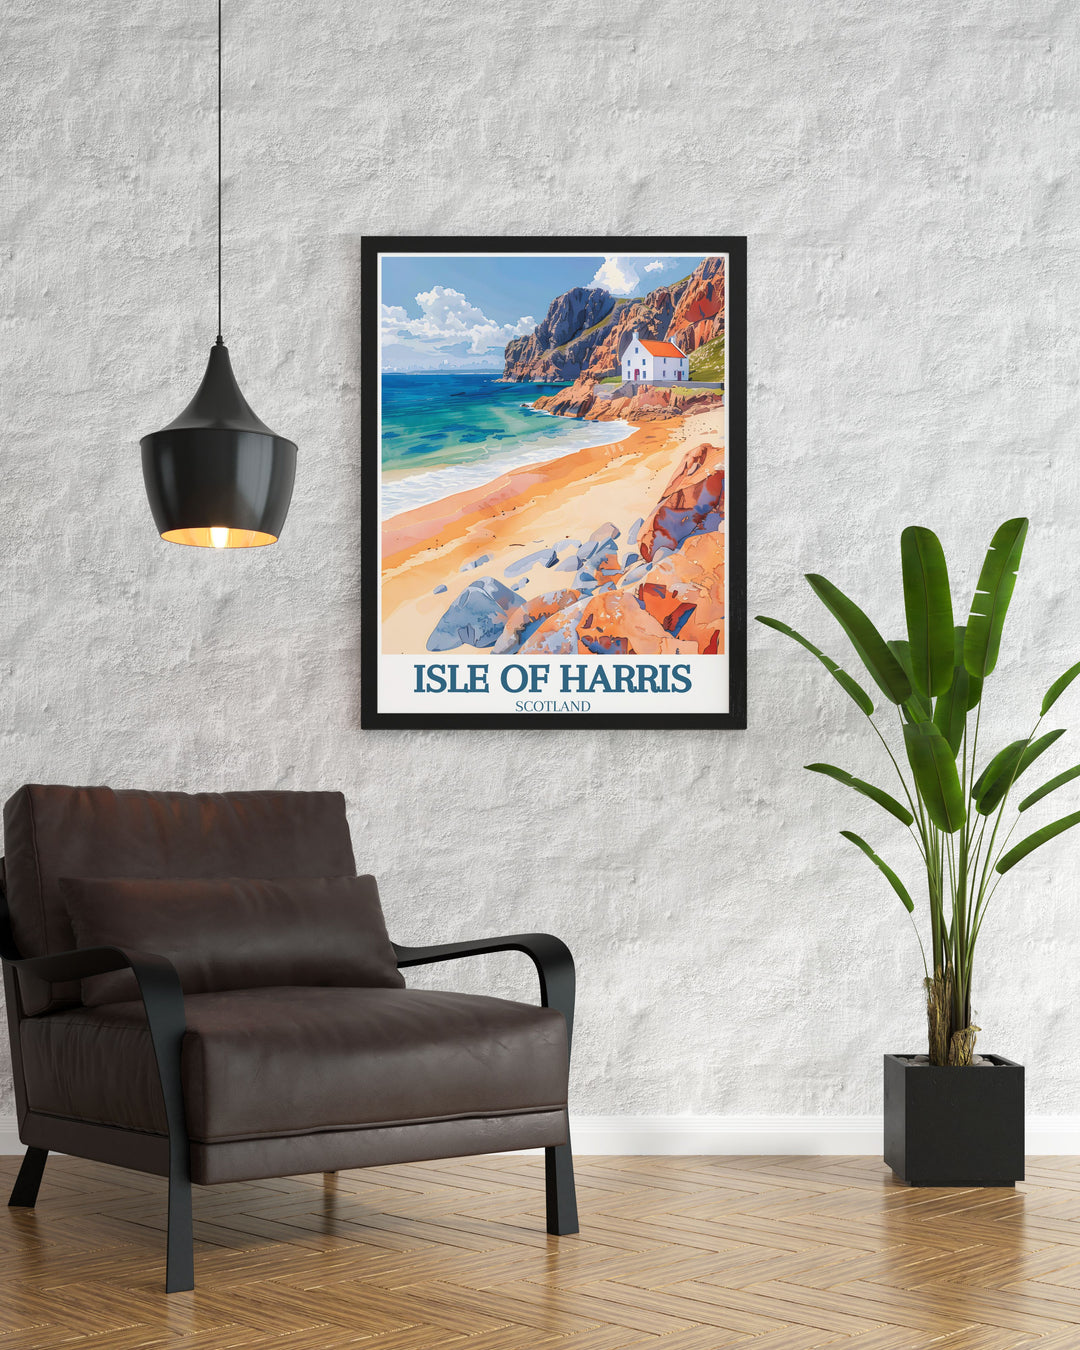 Gallery wall art of the Isle of Harris, showcasing its stunning natural beauty and historical significance, making it a standout piece in any collection.